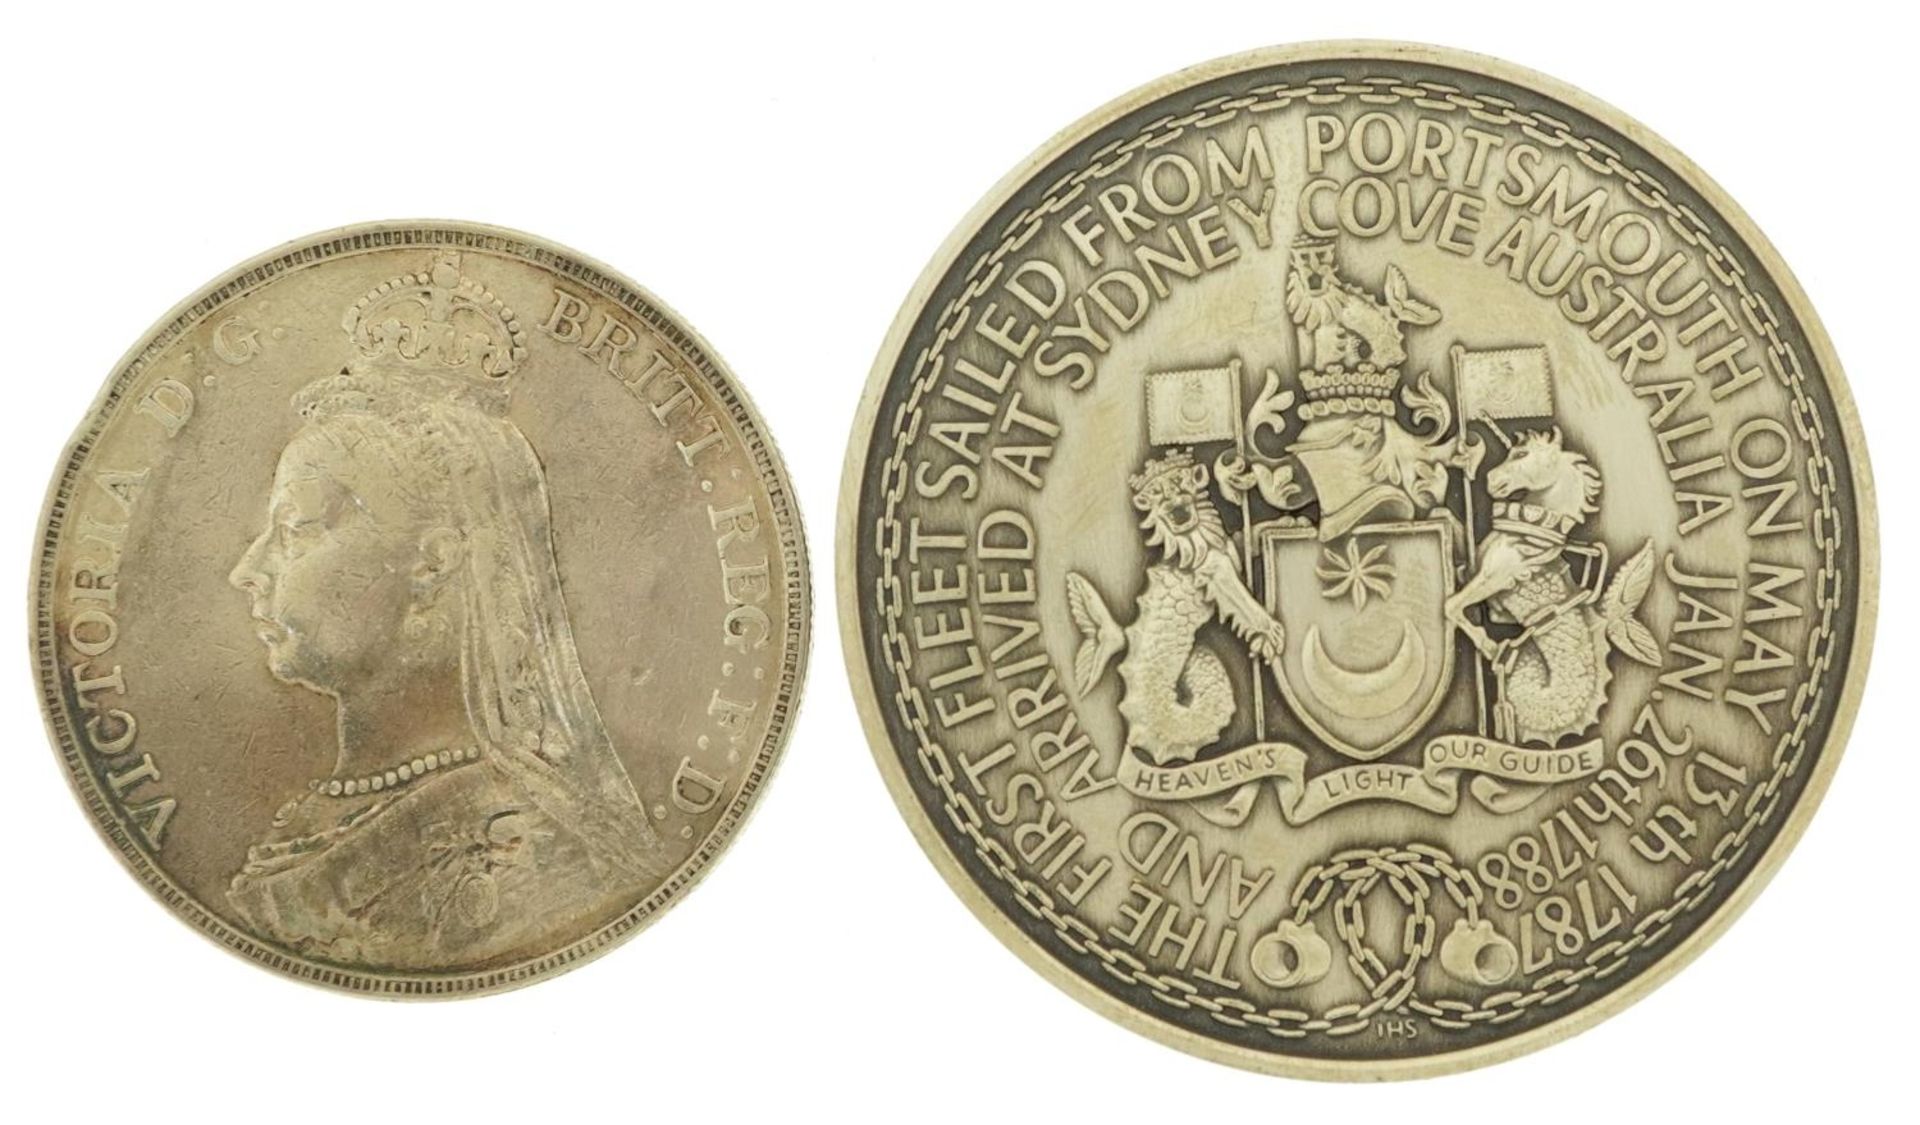 Queen Victoria 1891 silver crown and a silver medallion commemorating the Bicentennial of the - Bild 3 aus 6